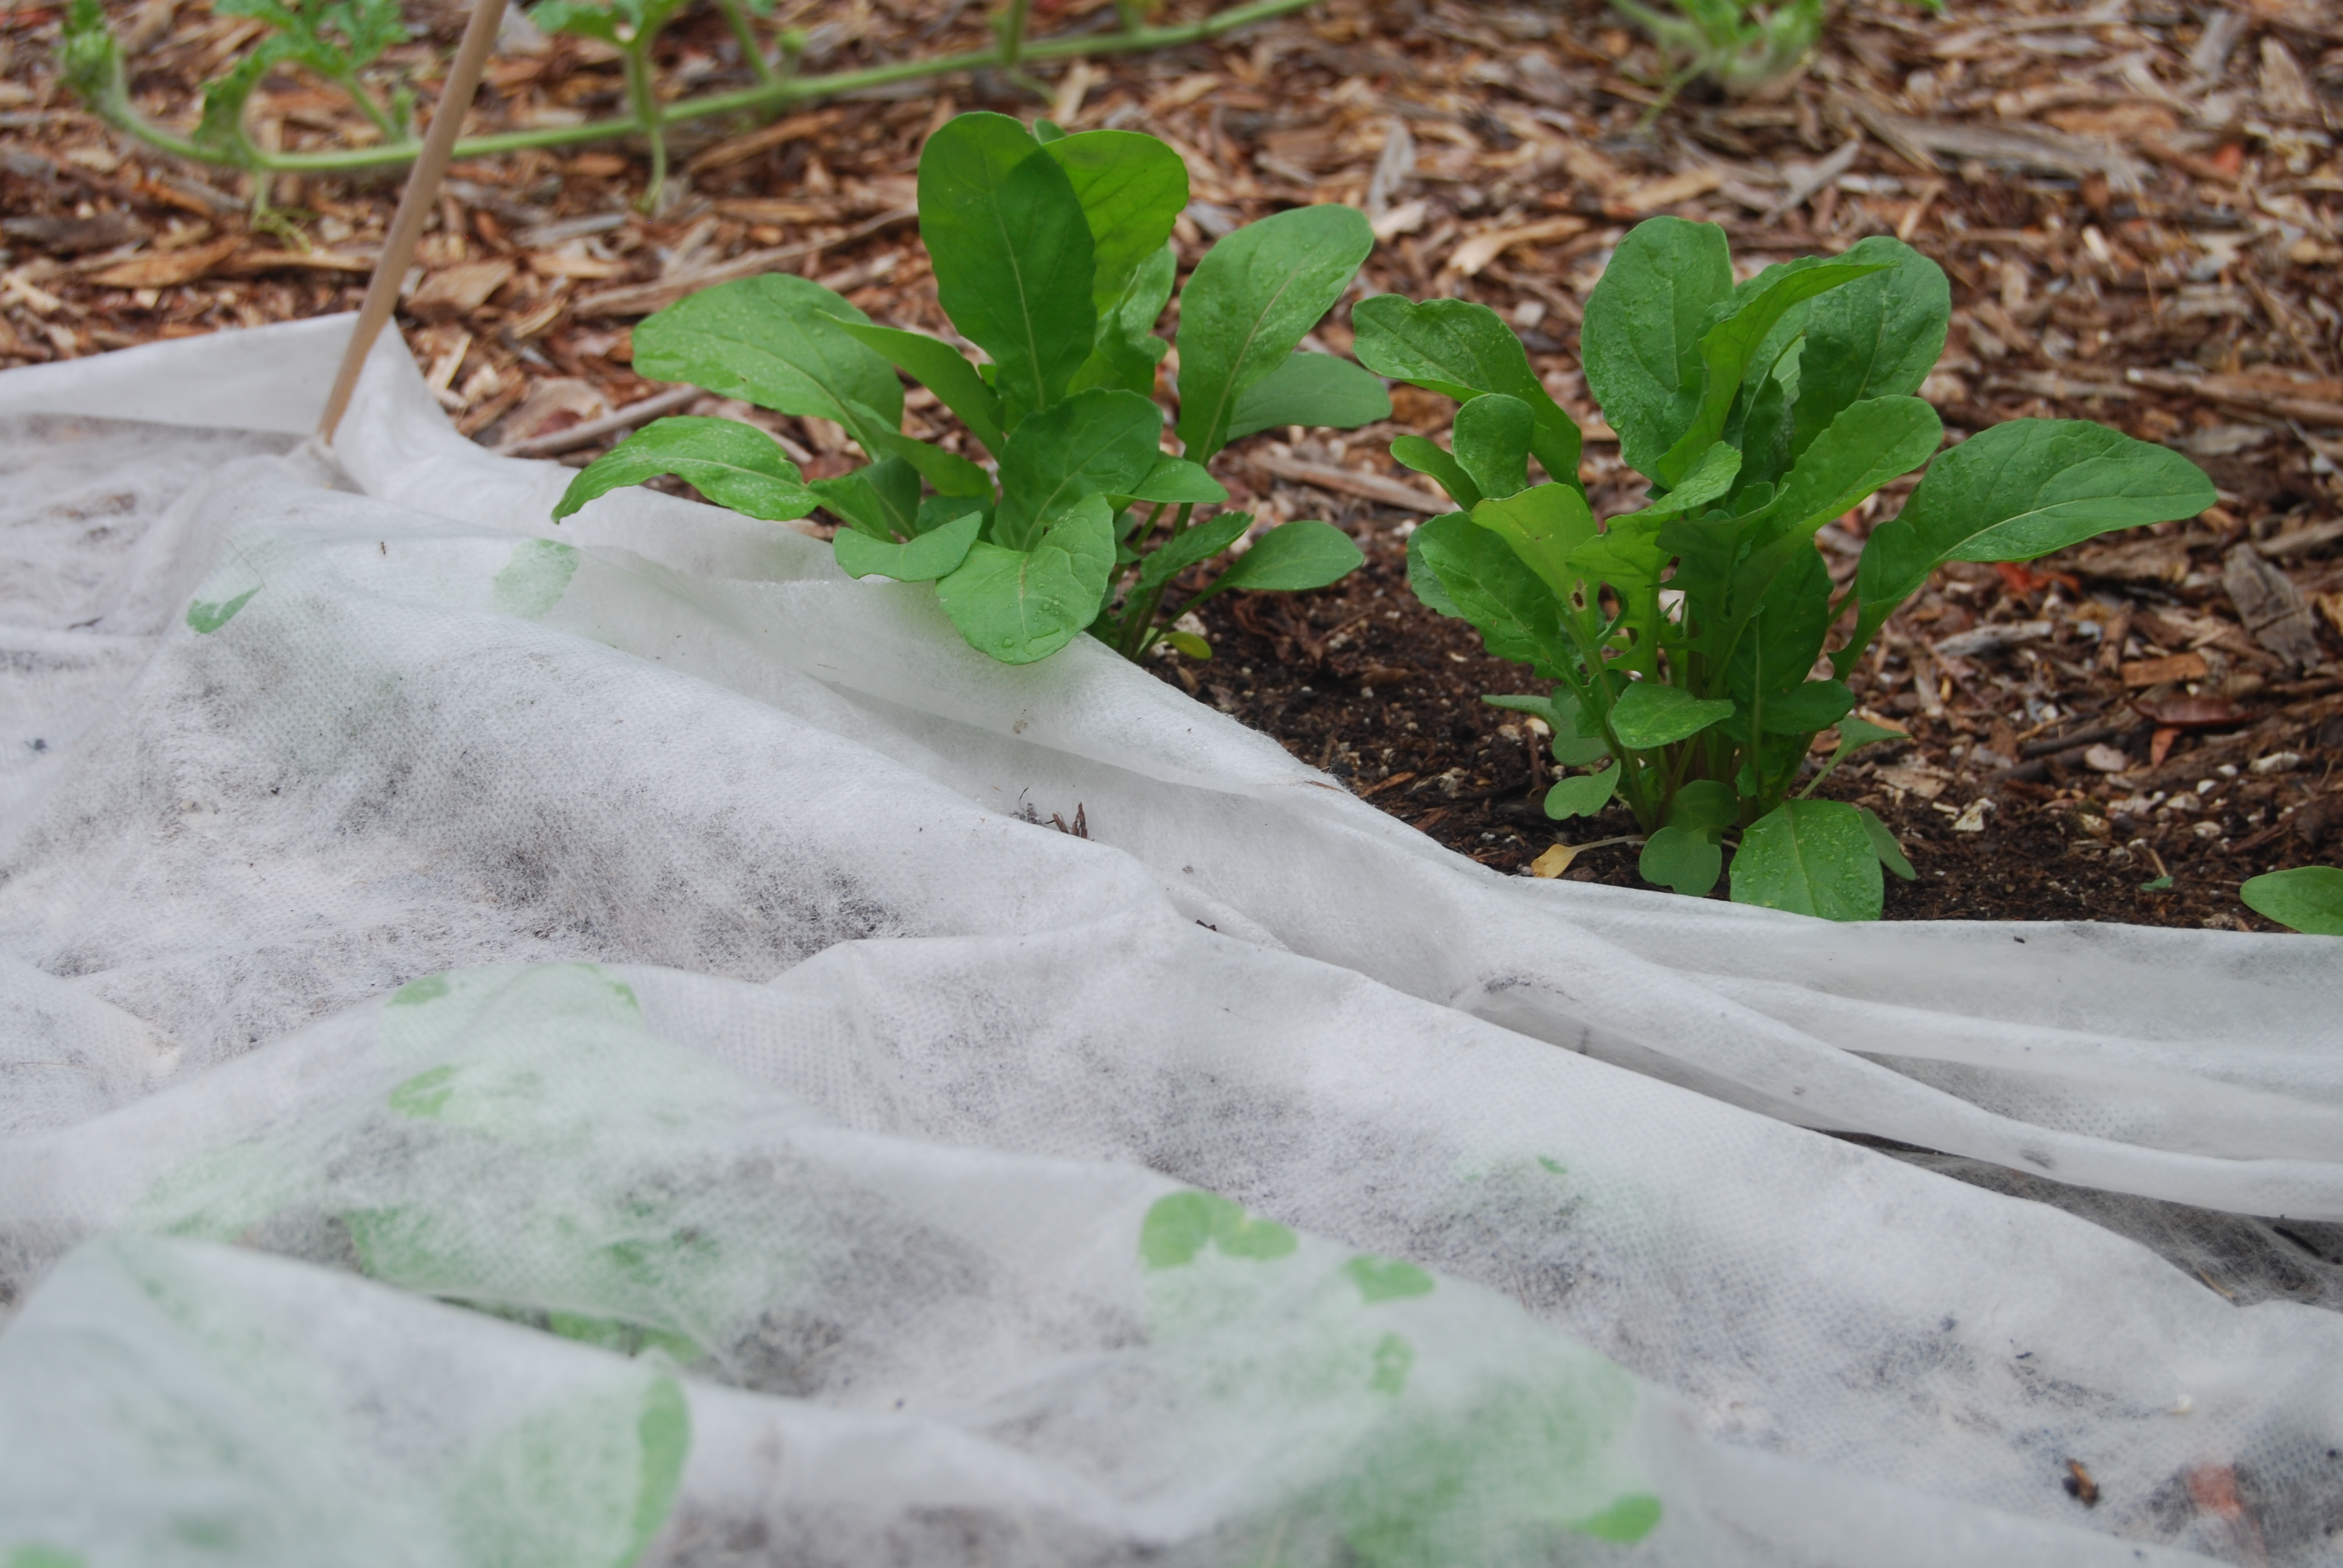 Late-planted arugula benefits from protection under floating row cover while it gets started. Soon we'll harvest tender leaves.